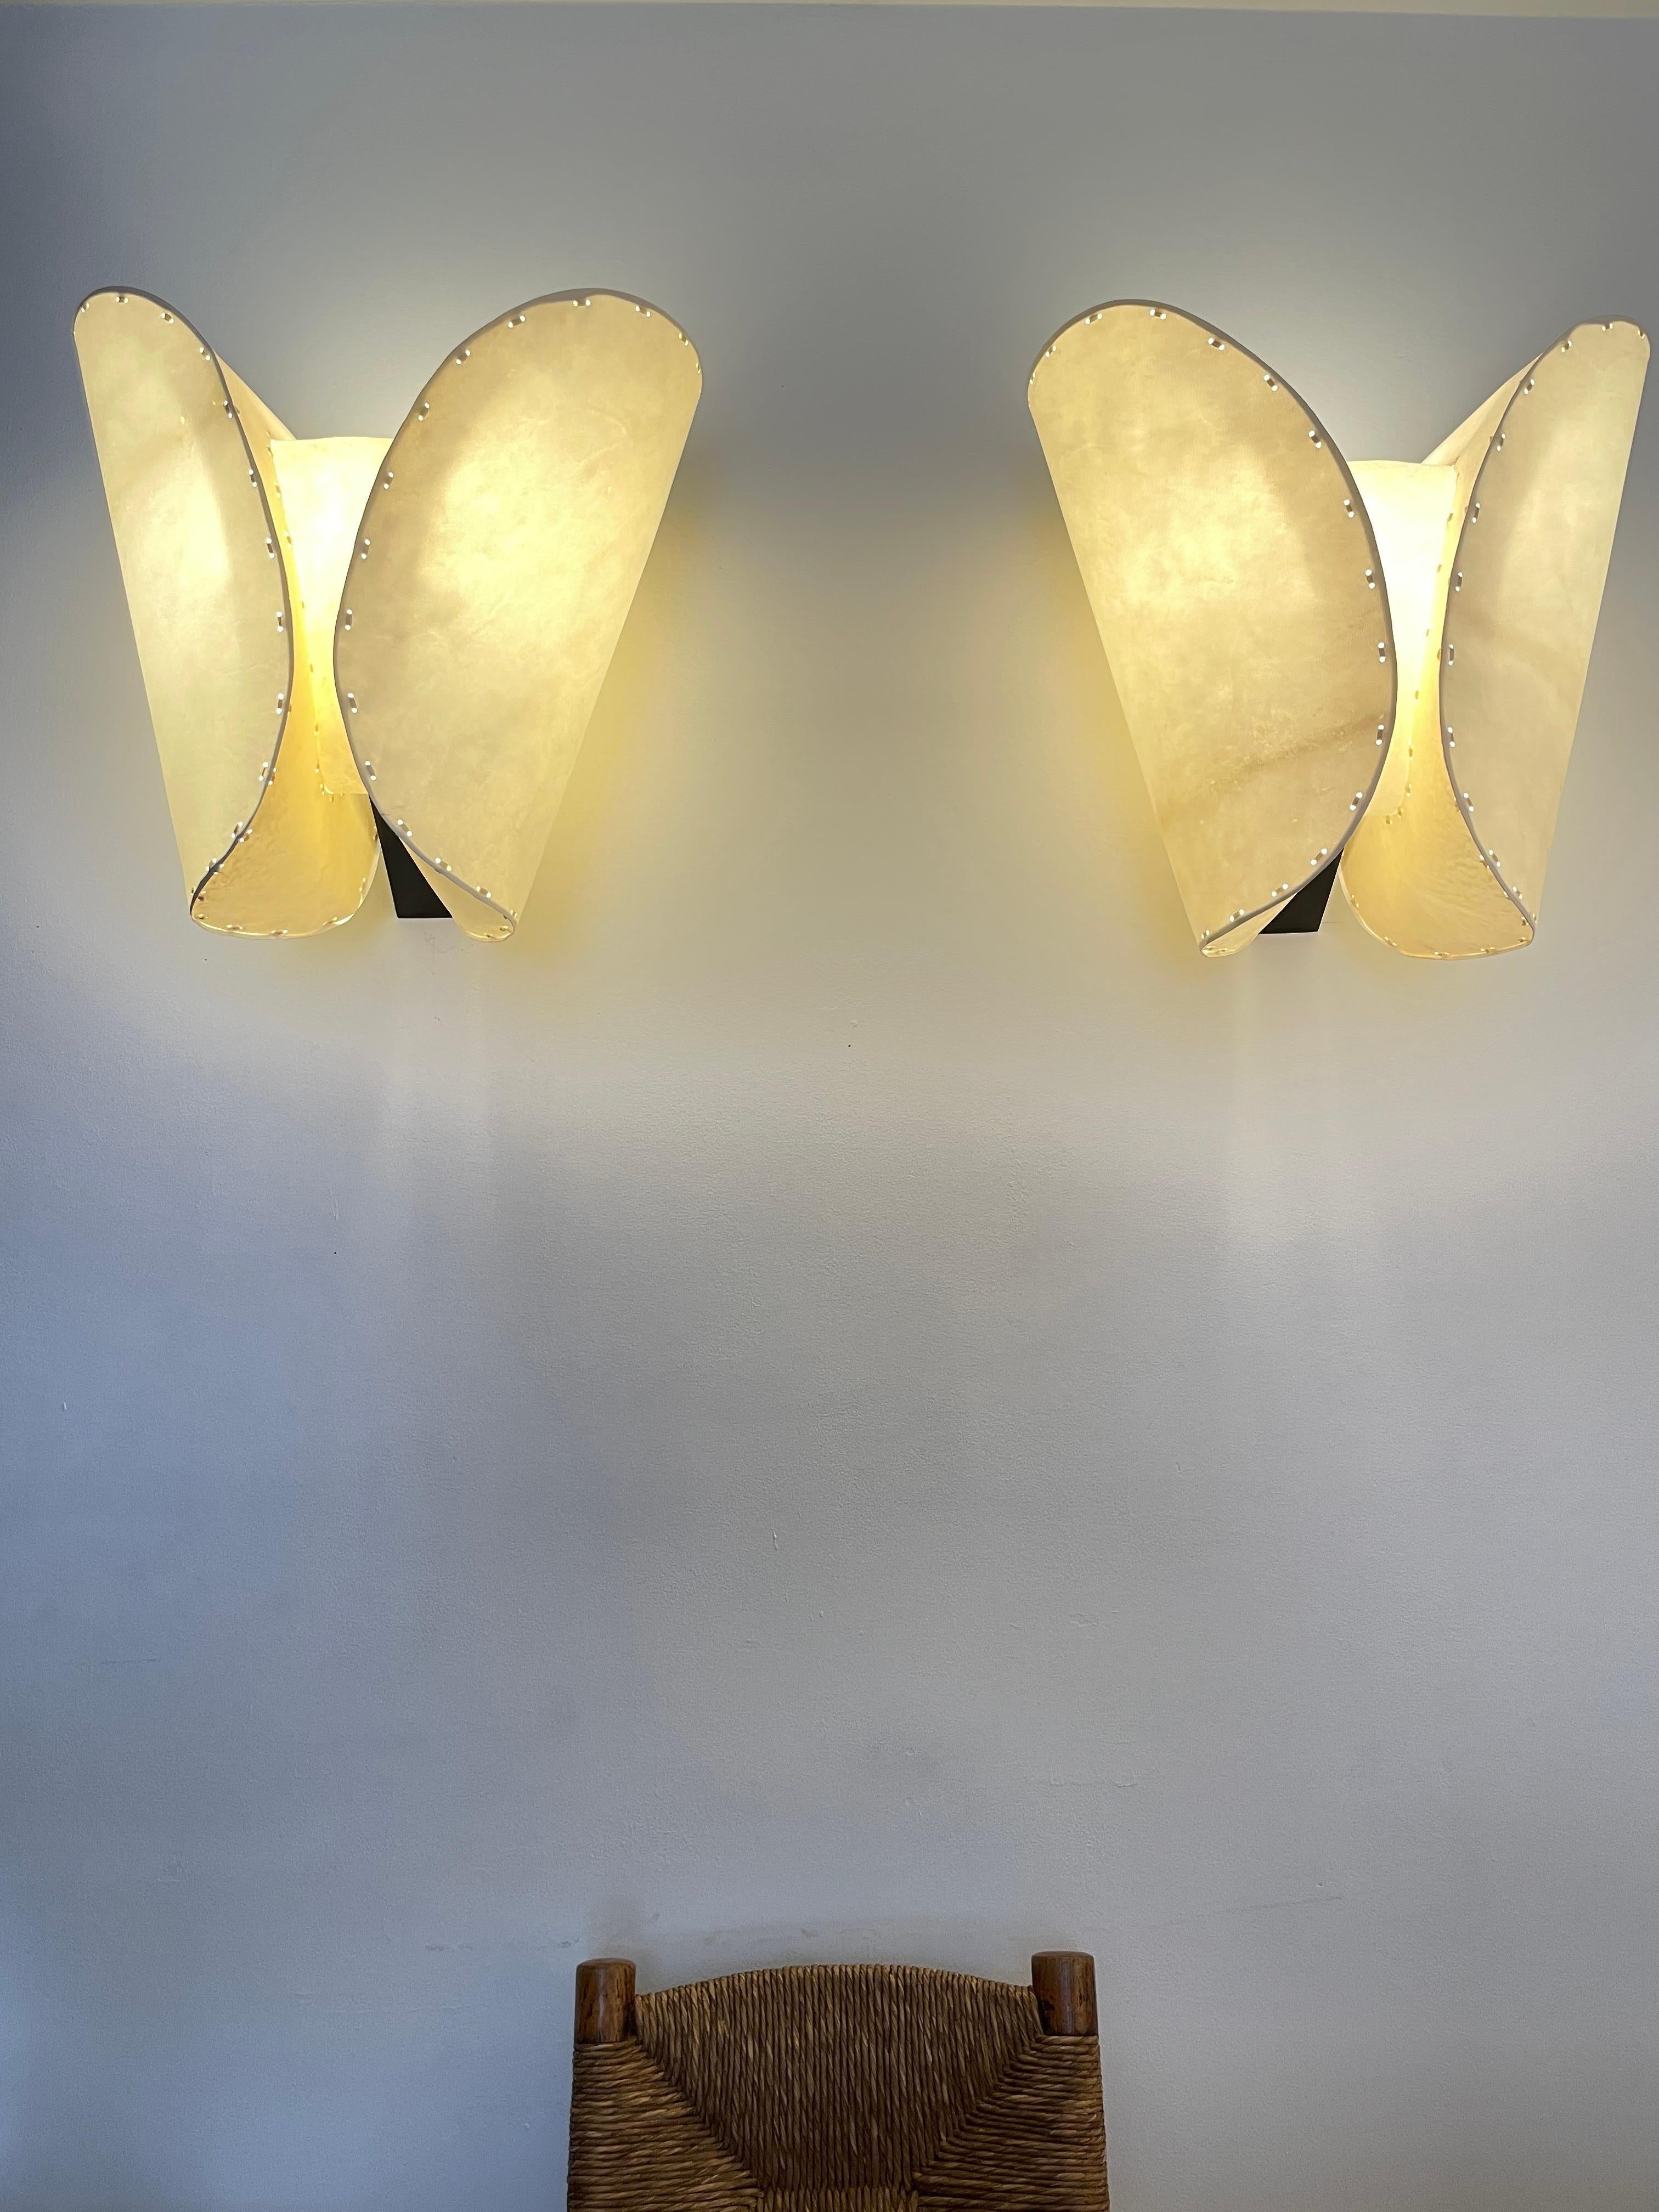 Mauro Fabbro “Gstaad” Wall Lamps Sconce  Alexandre Biaggi  Botega Volta. Signed  For Sale